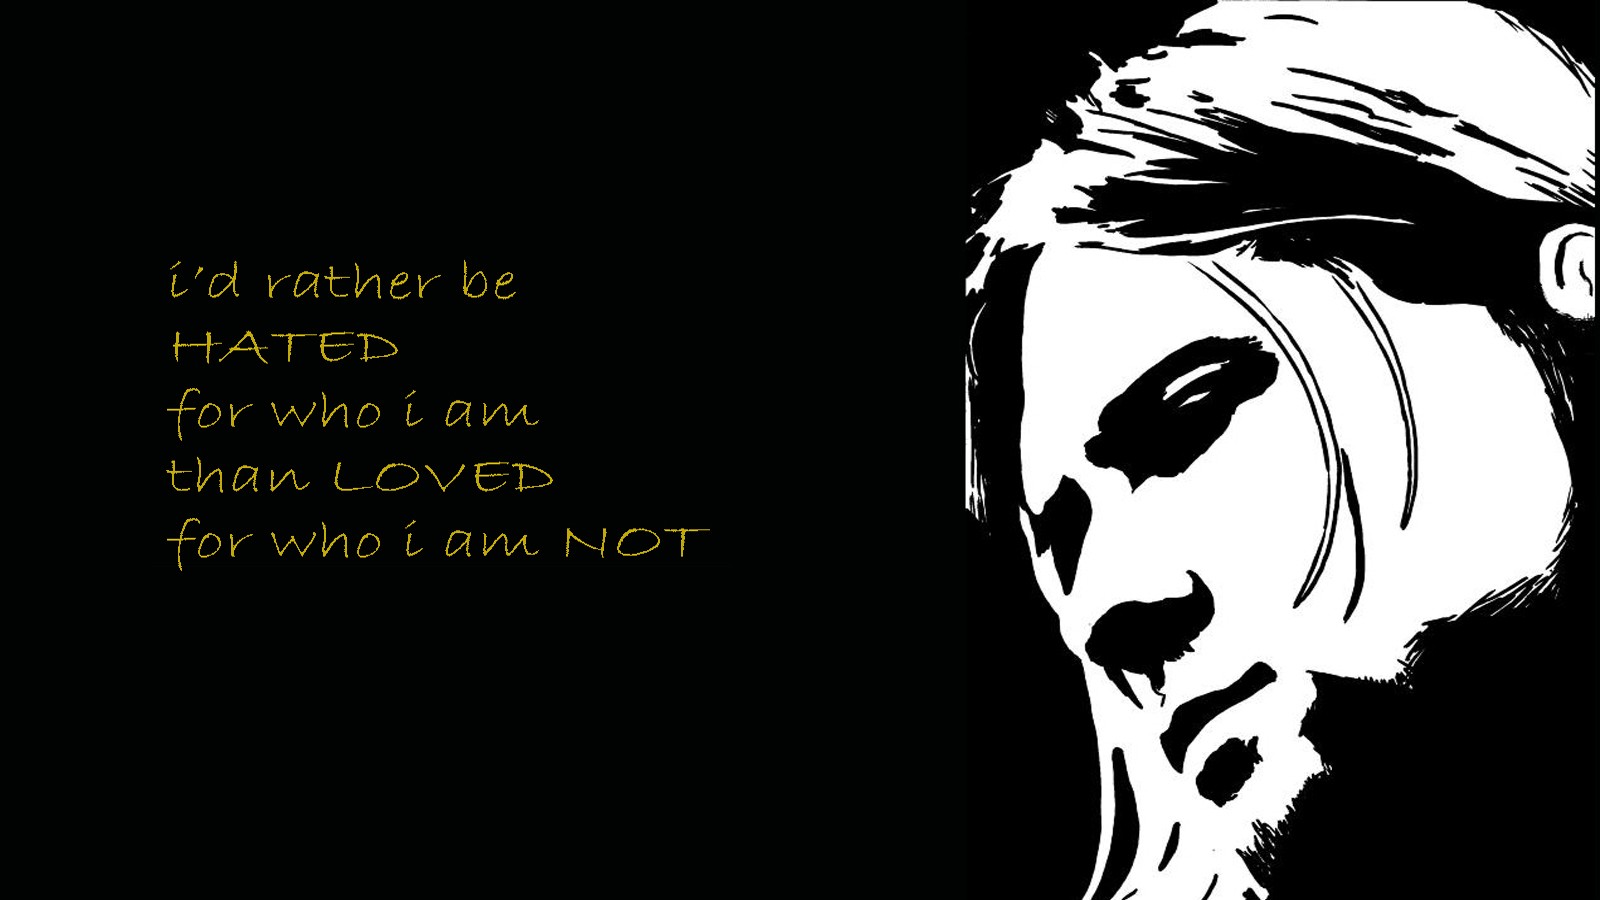 nirvana song quotes